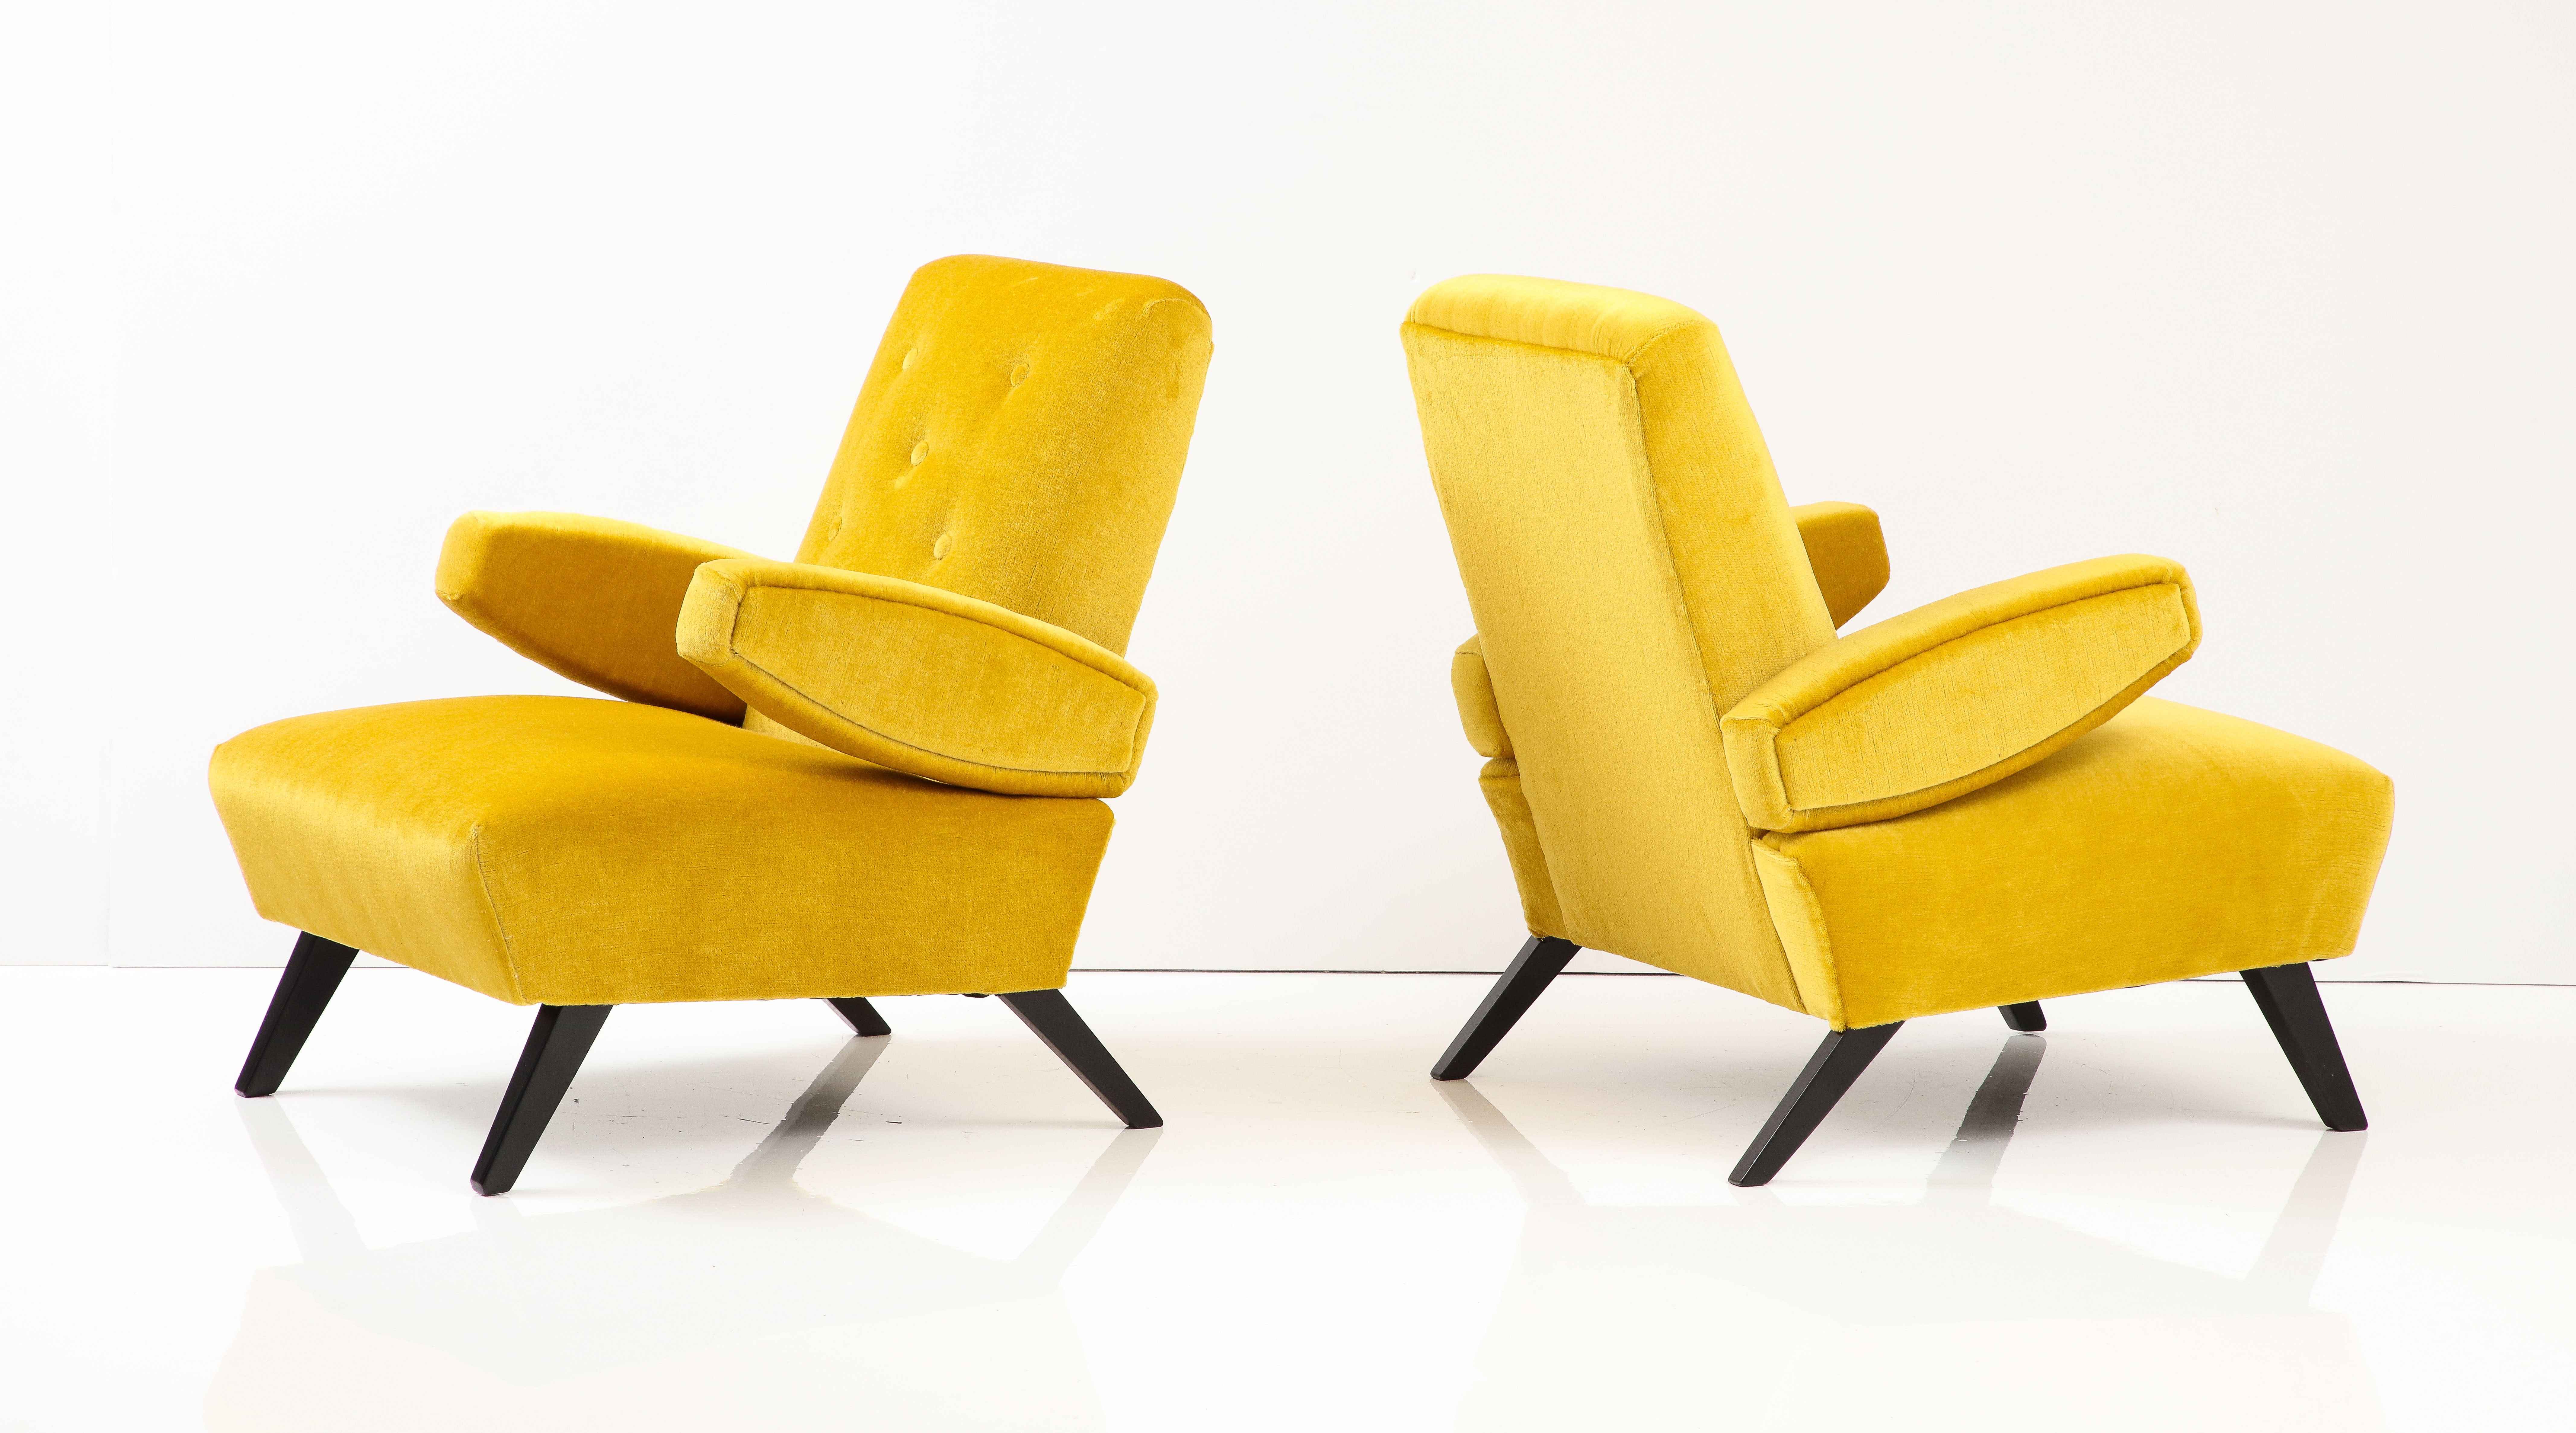 Amazing pair of floating arms 1940's lounge chairs attributed to Paul Laszlo, fully restored and newly re-upholstered in Donghia mohair, with minor wear and patina due to age and use, the chairs are well made and very heavy.